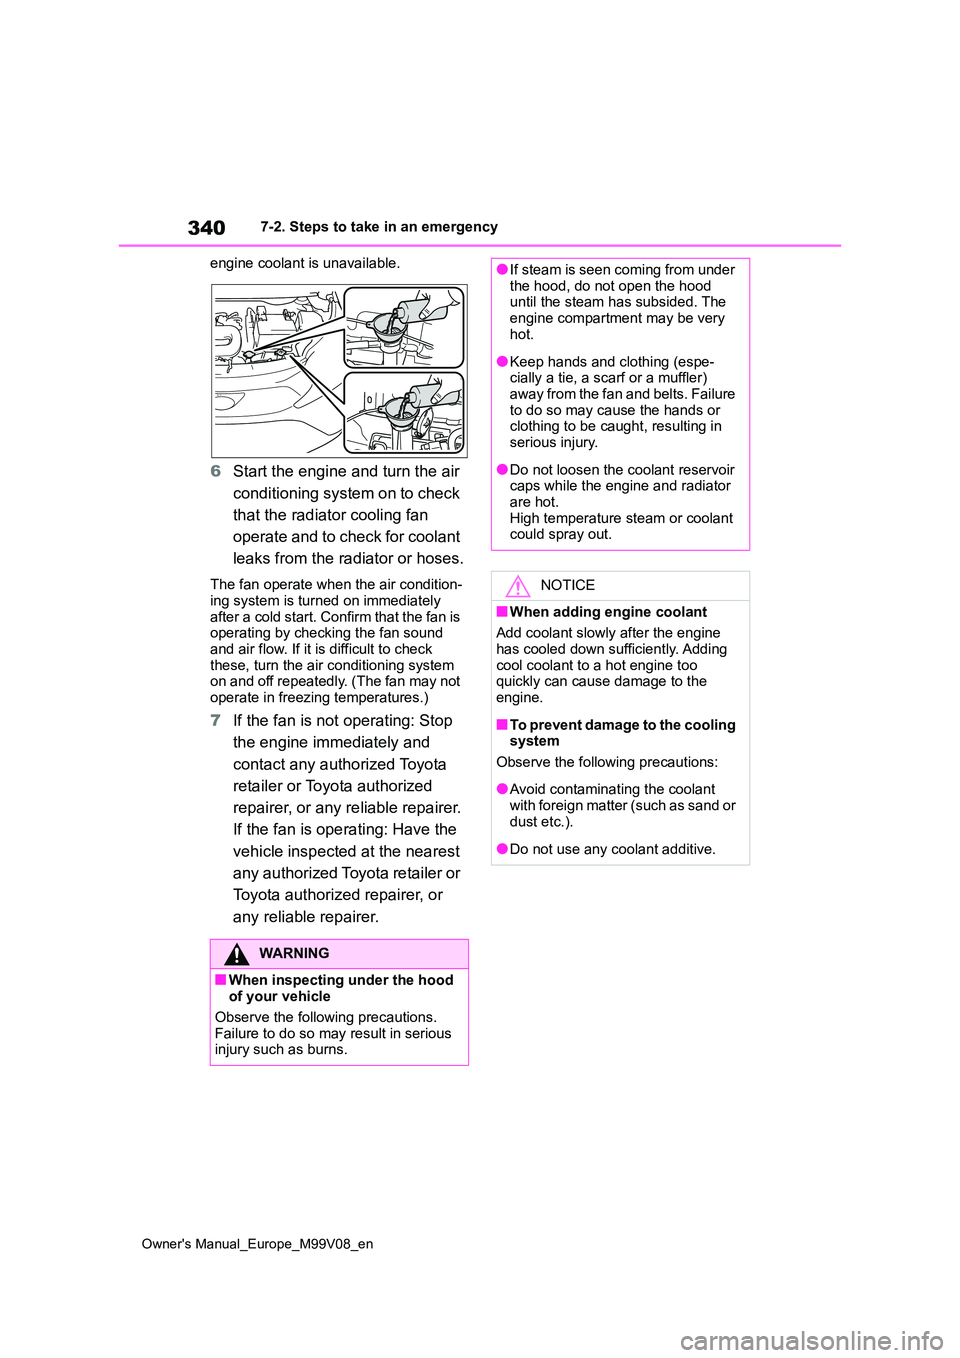 TOYOTA AYGO X 2022  Owners Manual (in English) 340
Owner's Manual_Europe_M99V08_en
7-2. Steps to take in an emergency 
engine coolant is unavailable.
6 Start the engine and turn the air  
conditioning system on to check  
that the radiator coo